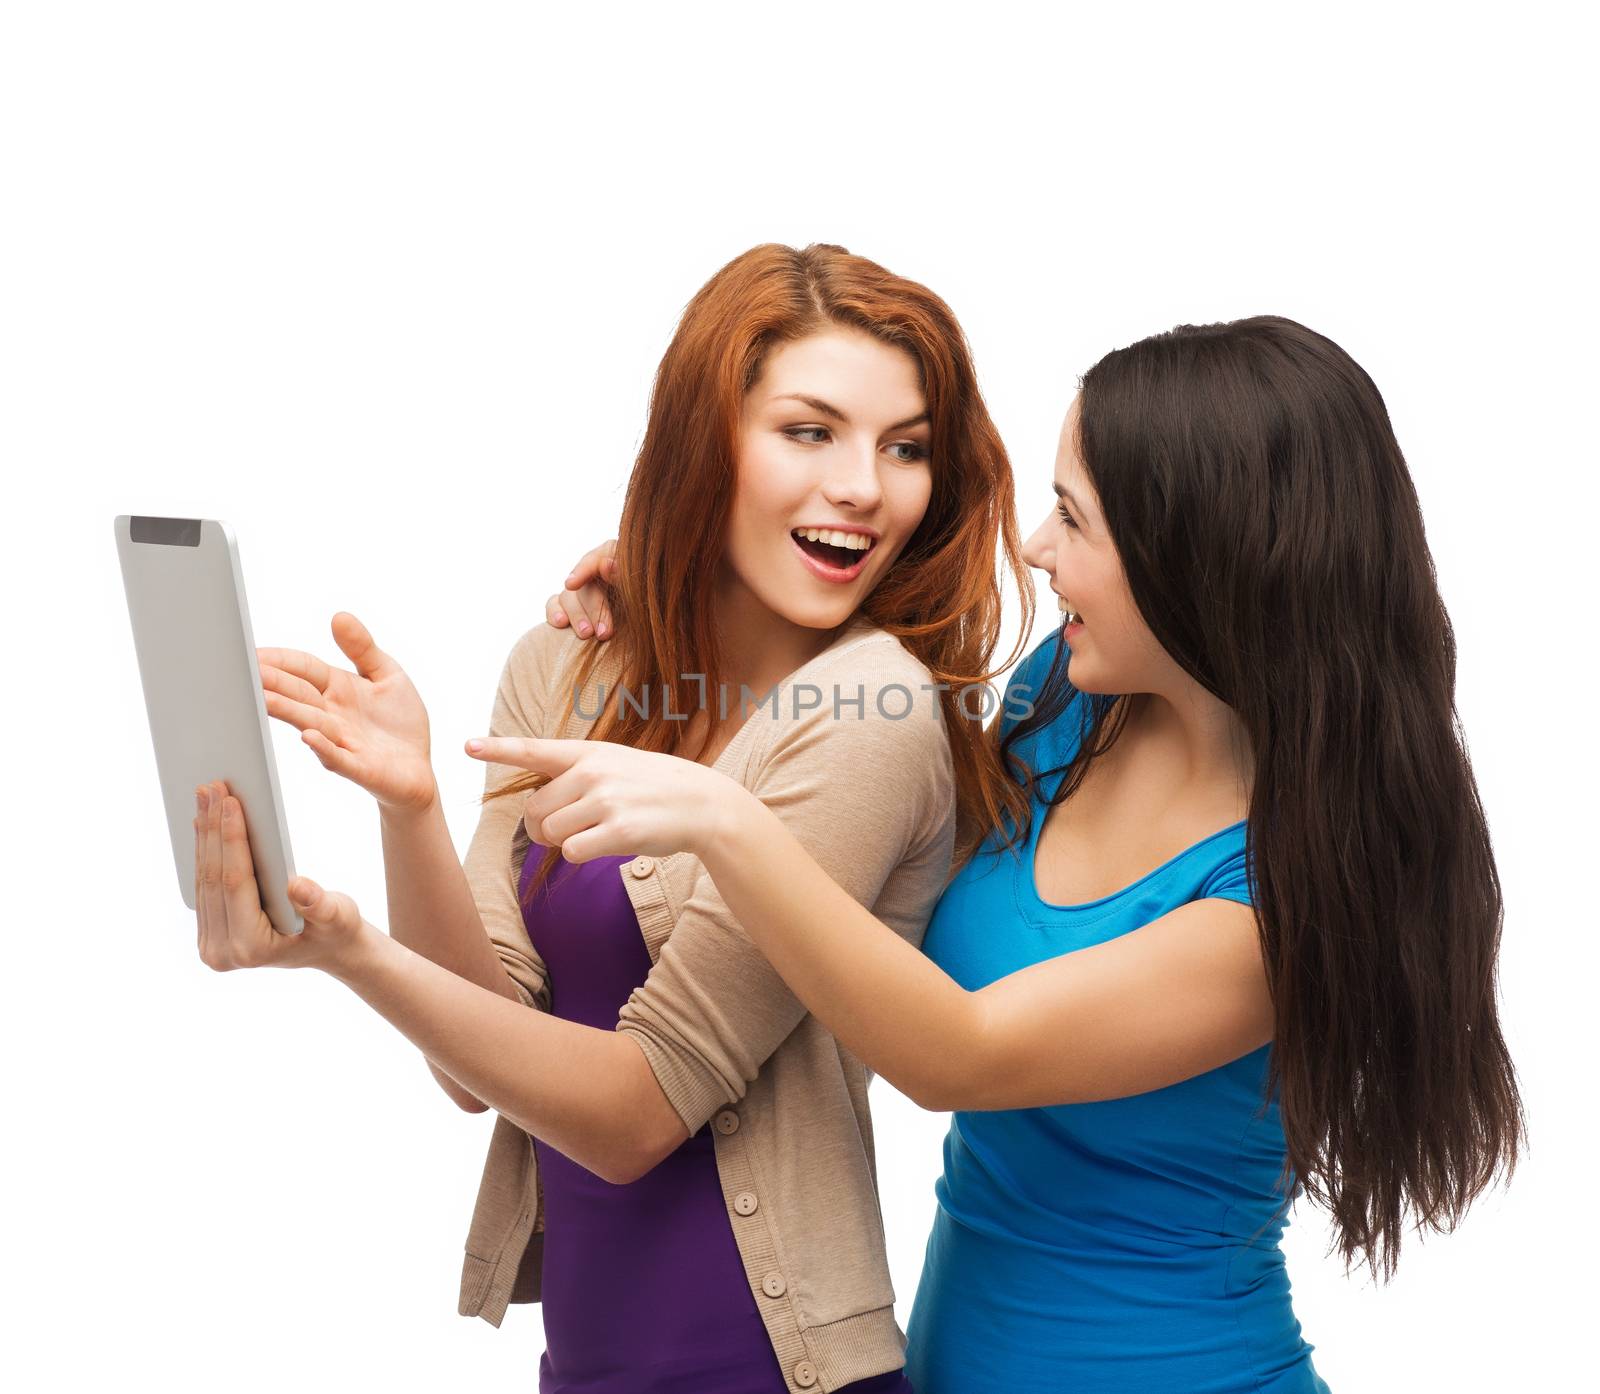 technology, friendship and people concept - two smiling teenagers pointing finger at tablet pc screen